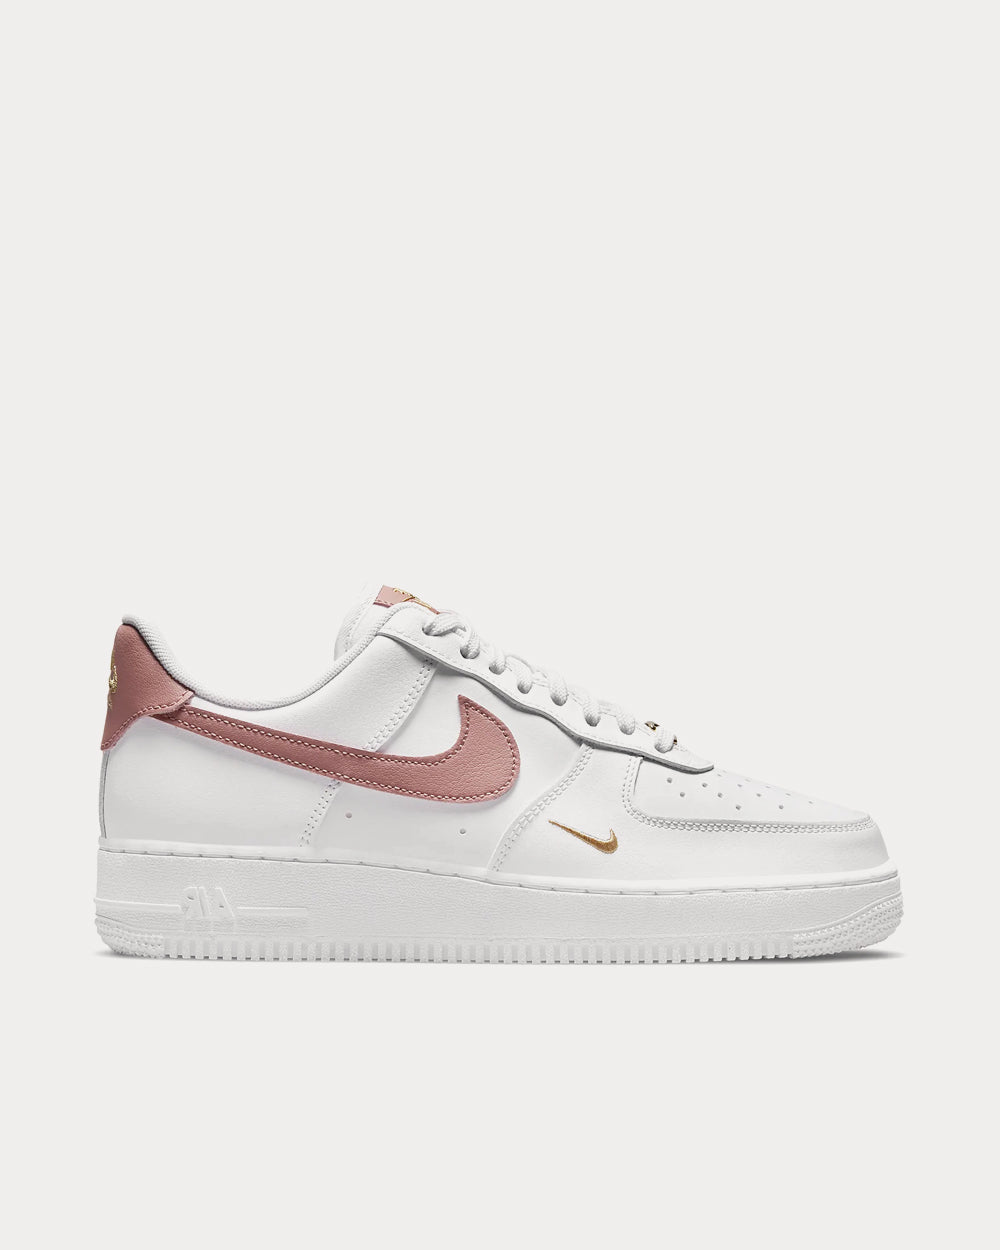 Air Force 1 '07 Essential White / Rust Pink Low Top Sneakers